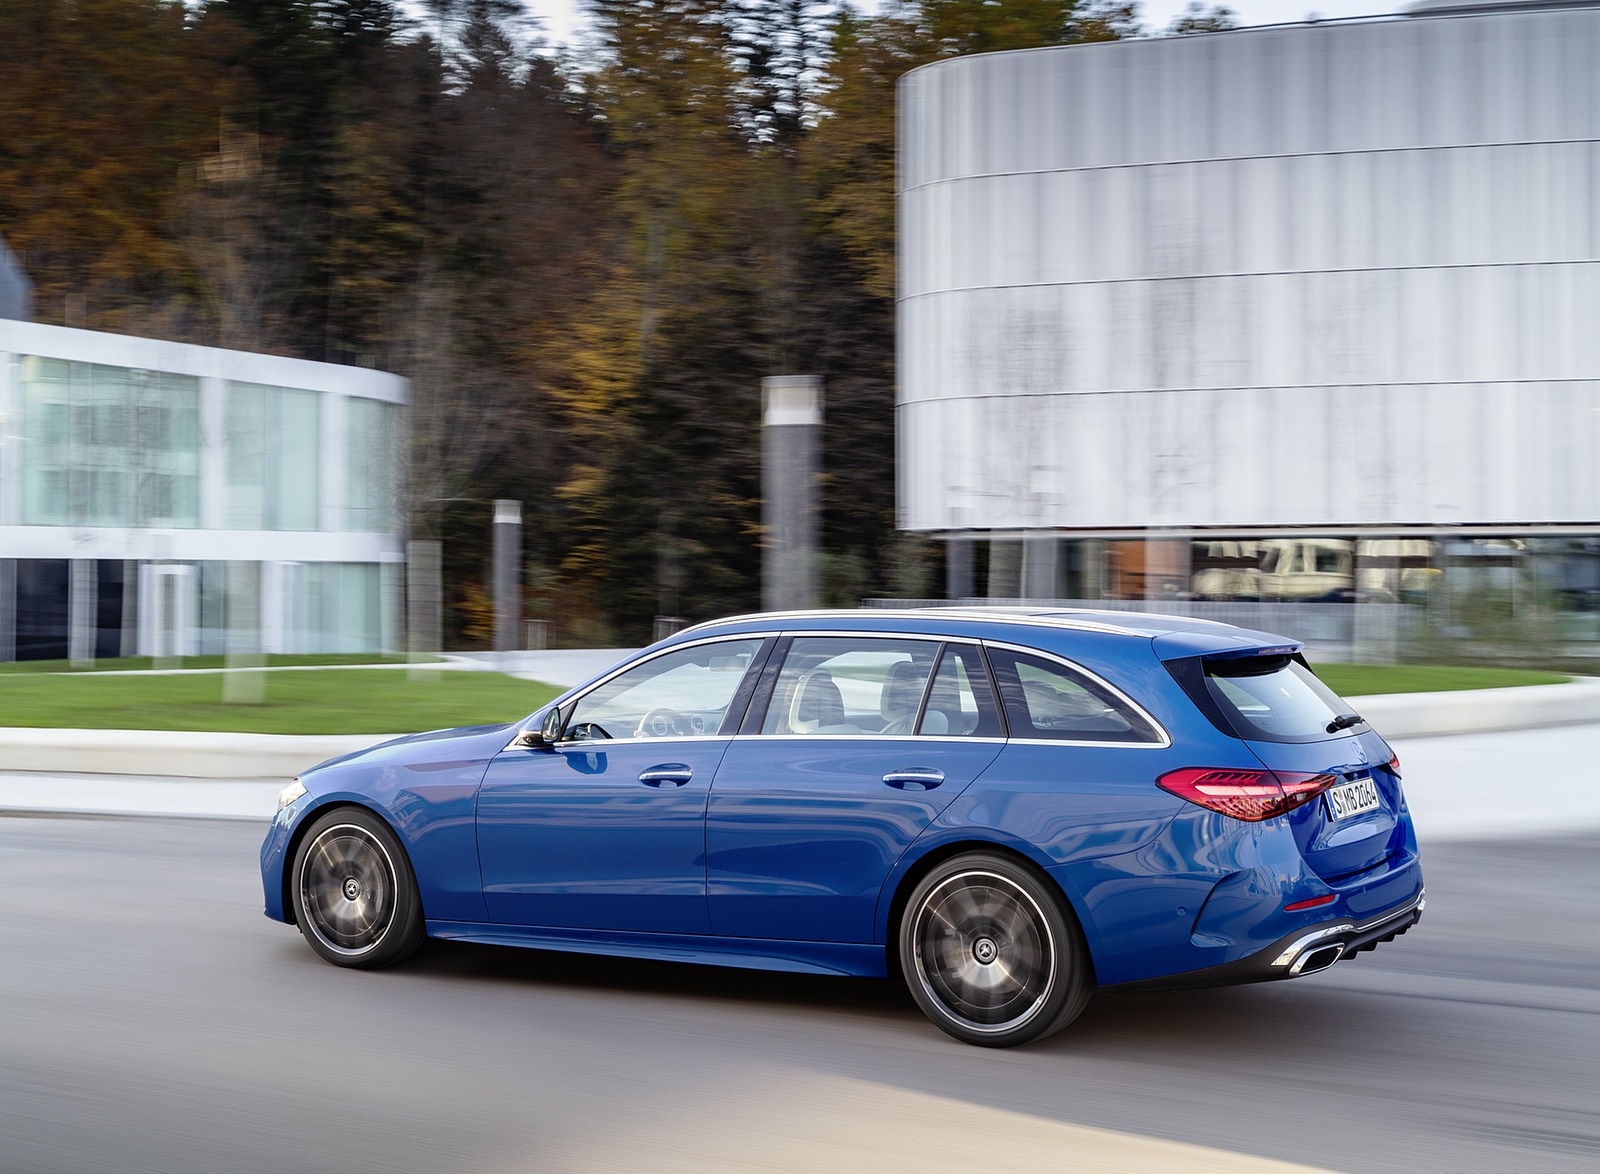 2022 Mercedes-Benz C-Class Wagon T-Model (Color: Spectral Blue) Rear Three-Quarter Wallpapers  #16 of 50